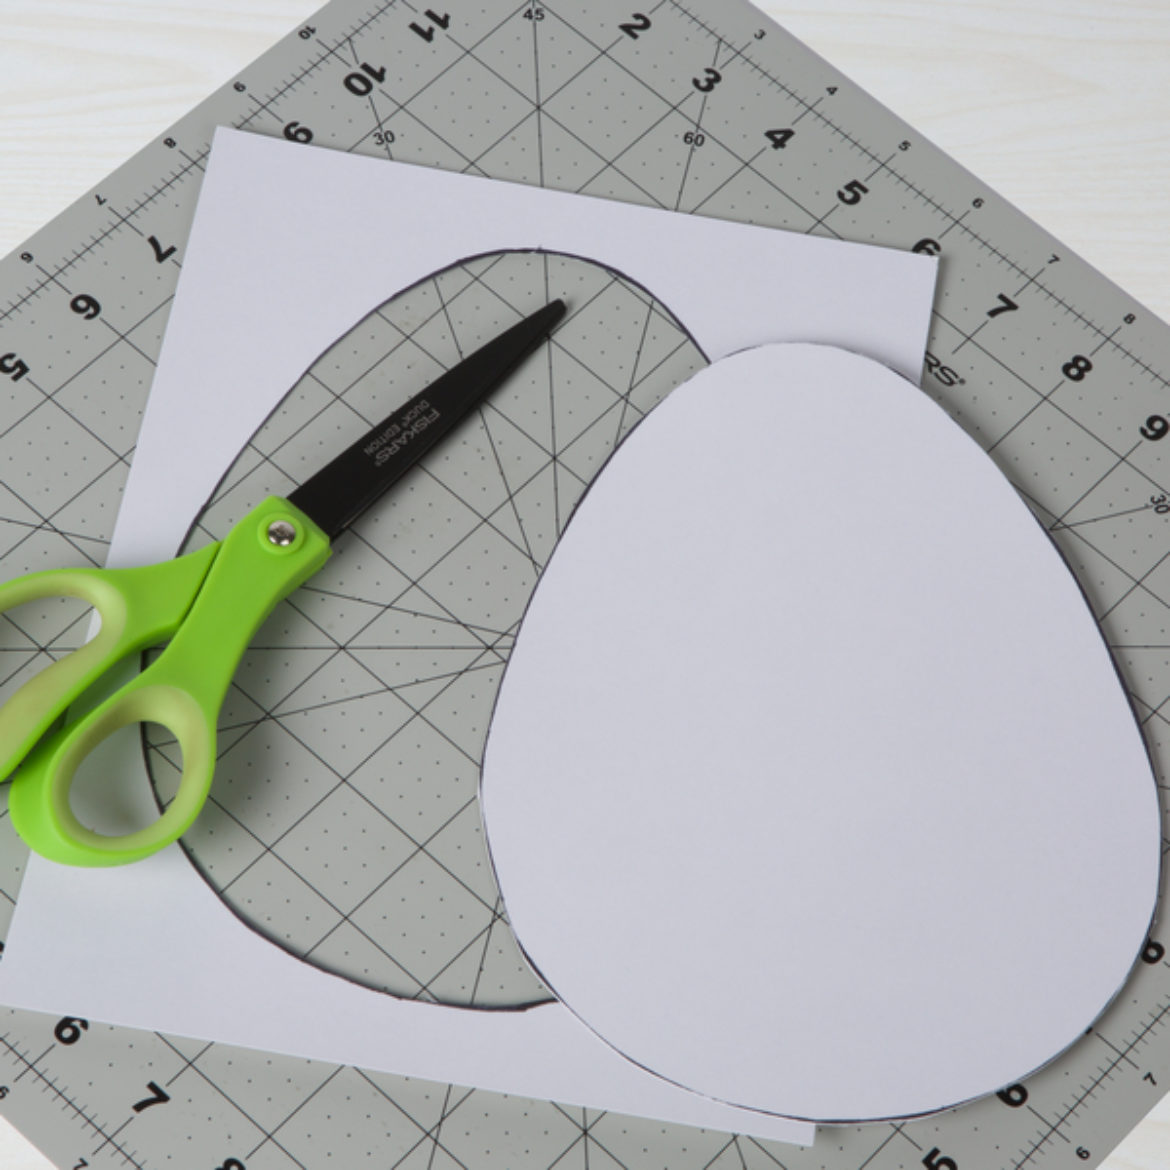 Egg shape drawn and cut out